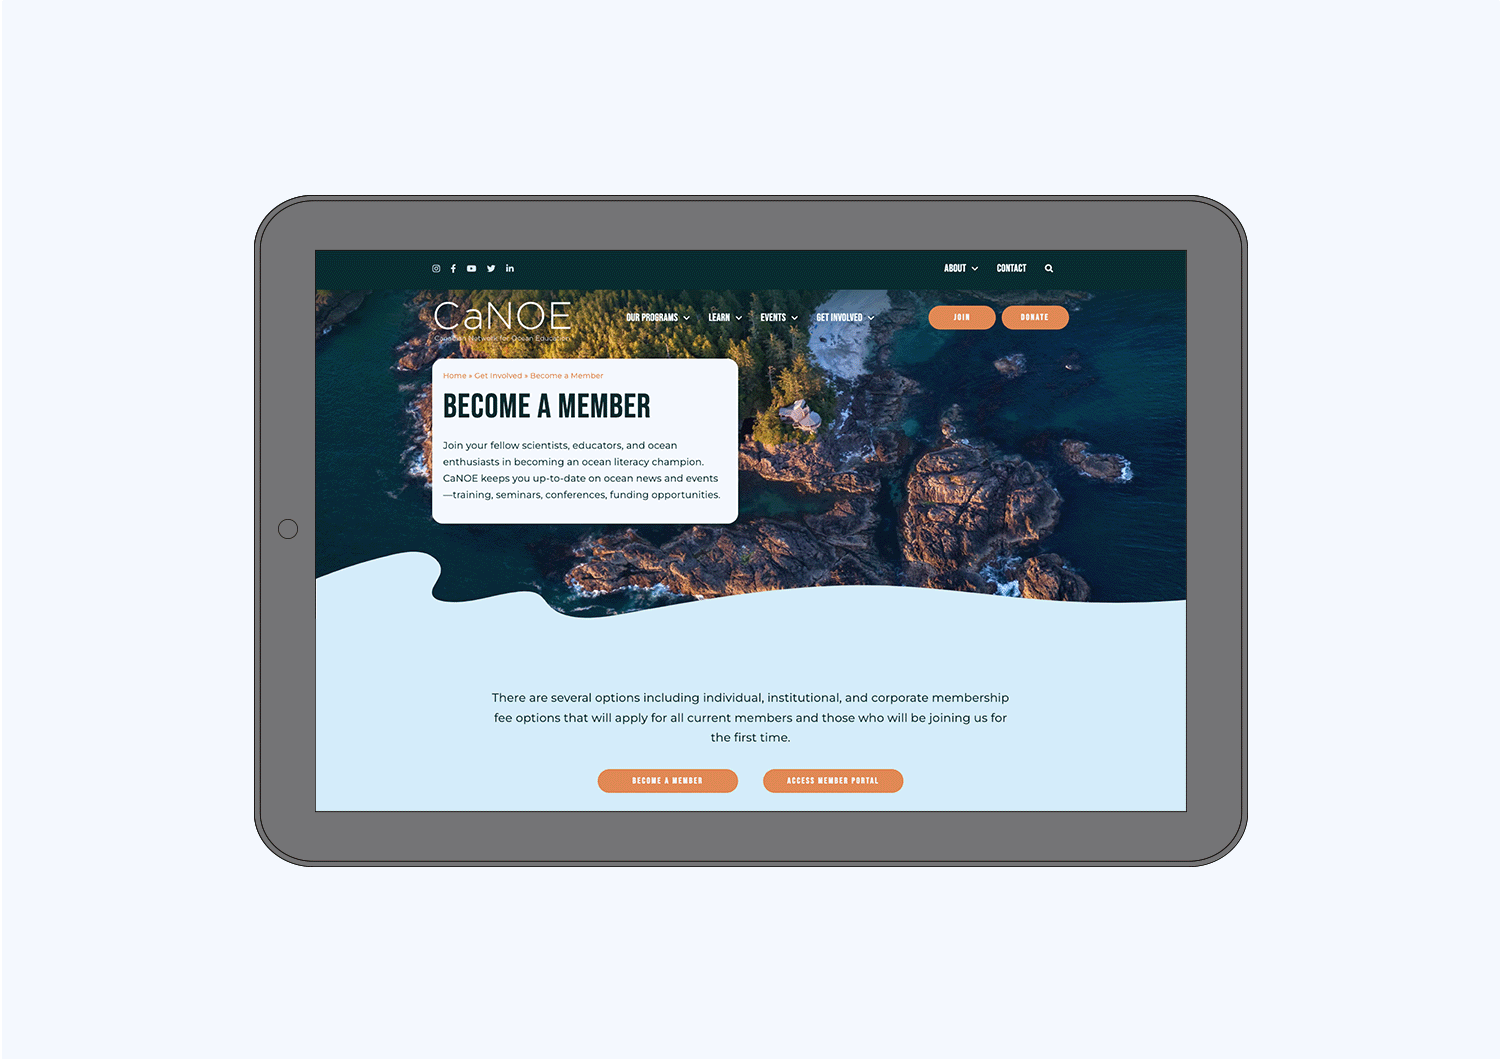 A mockup of the CaNOE website on a tablet device showing that it is responsive,